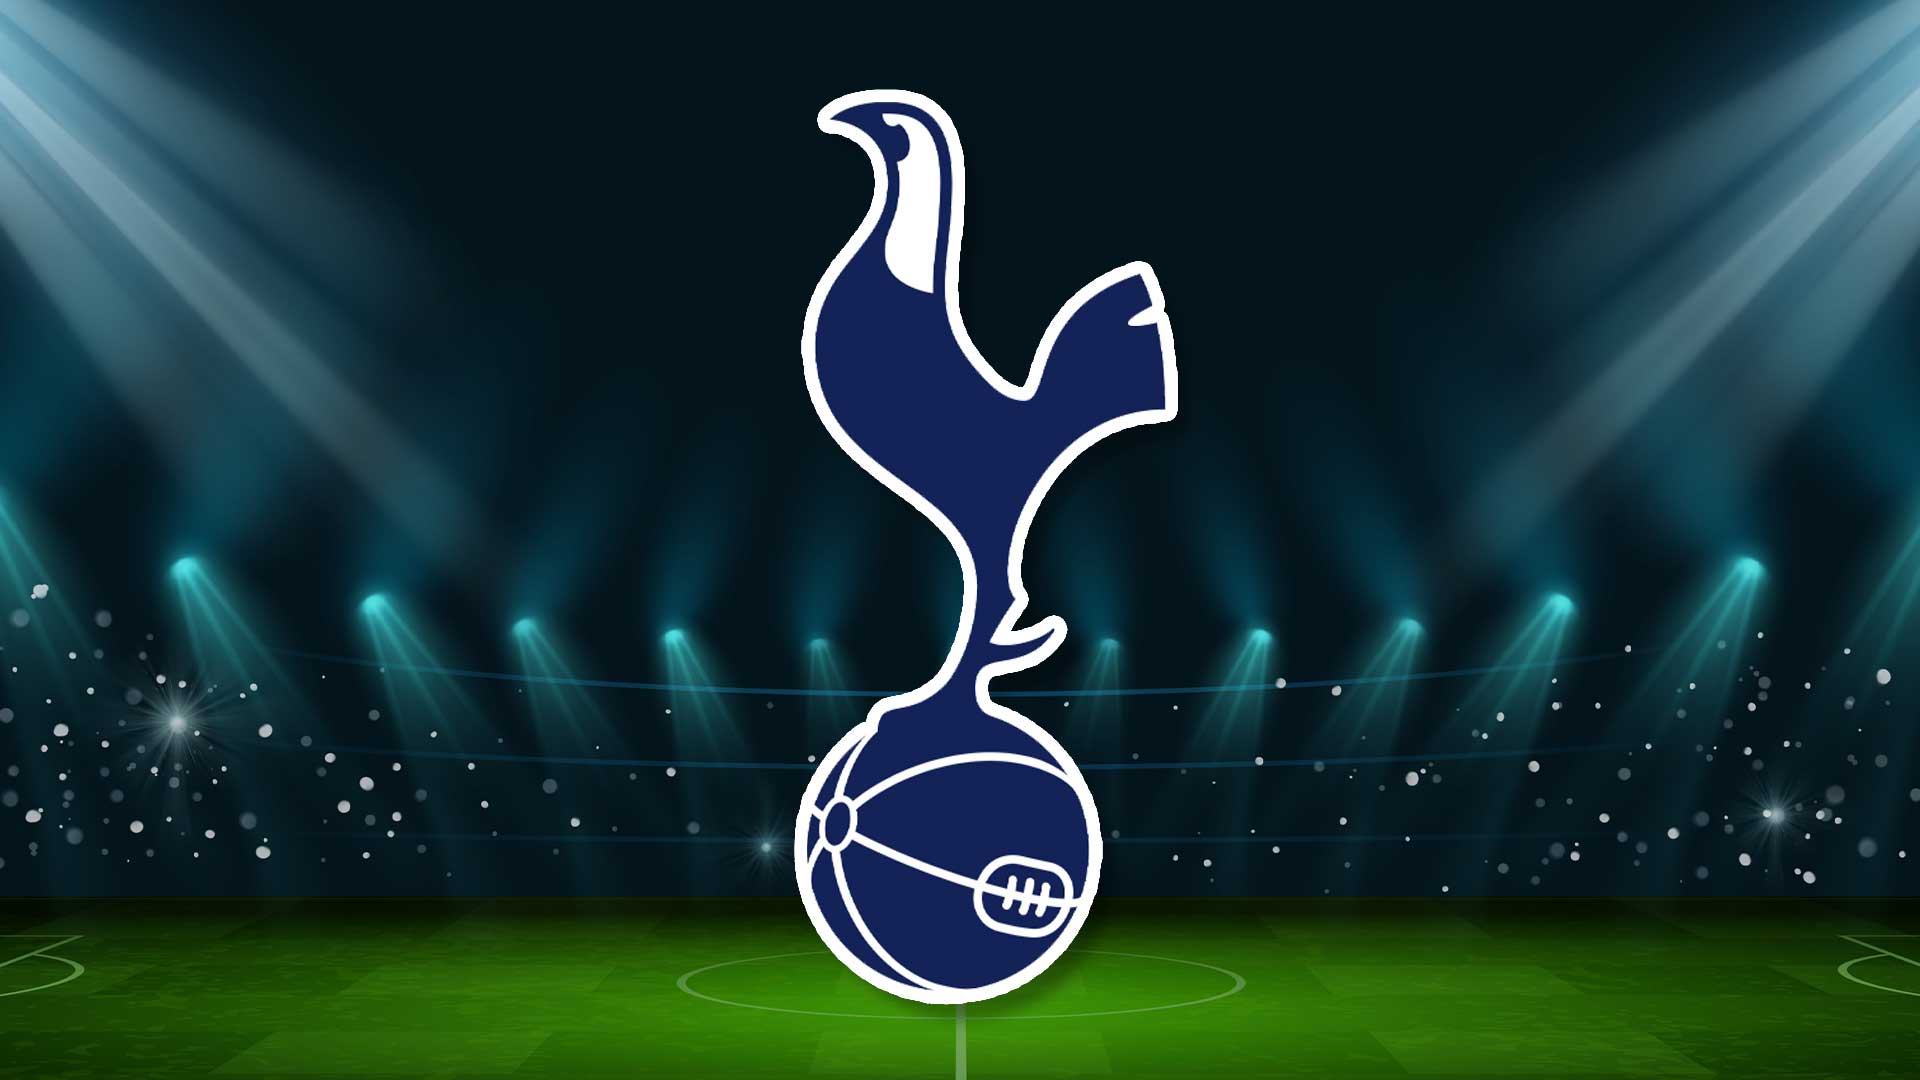 The Tottenham Hotspur badge with a generic football stadium in the background